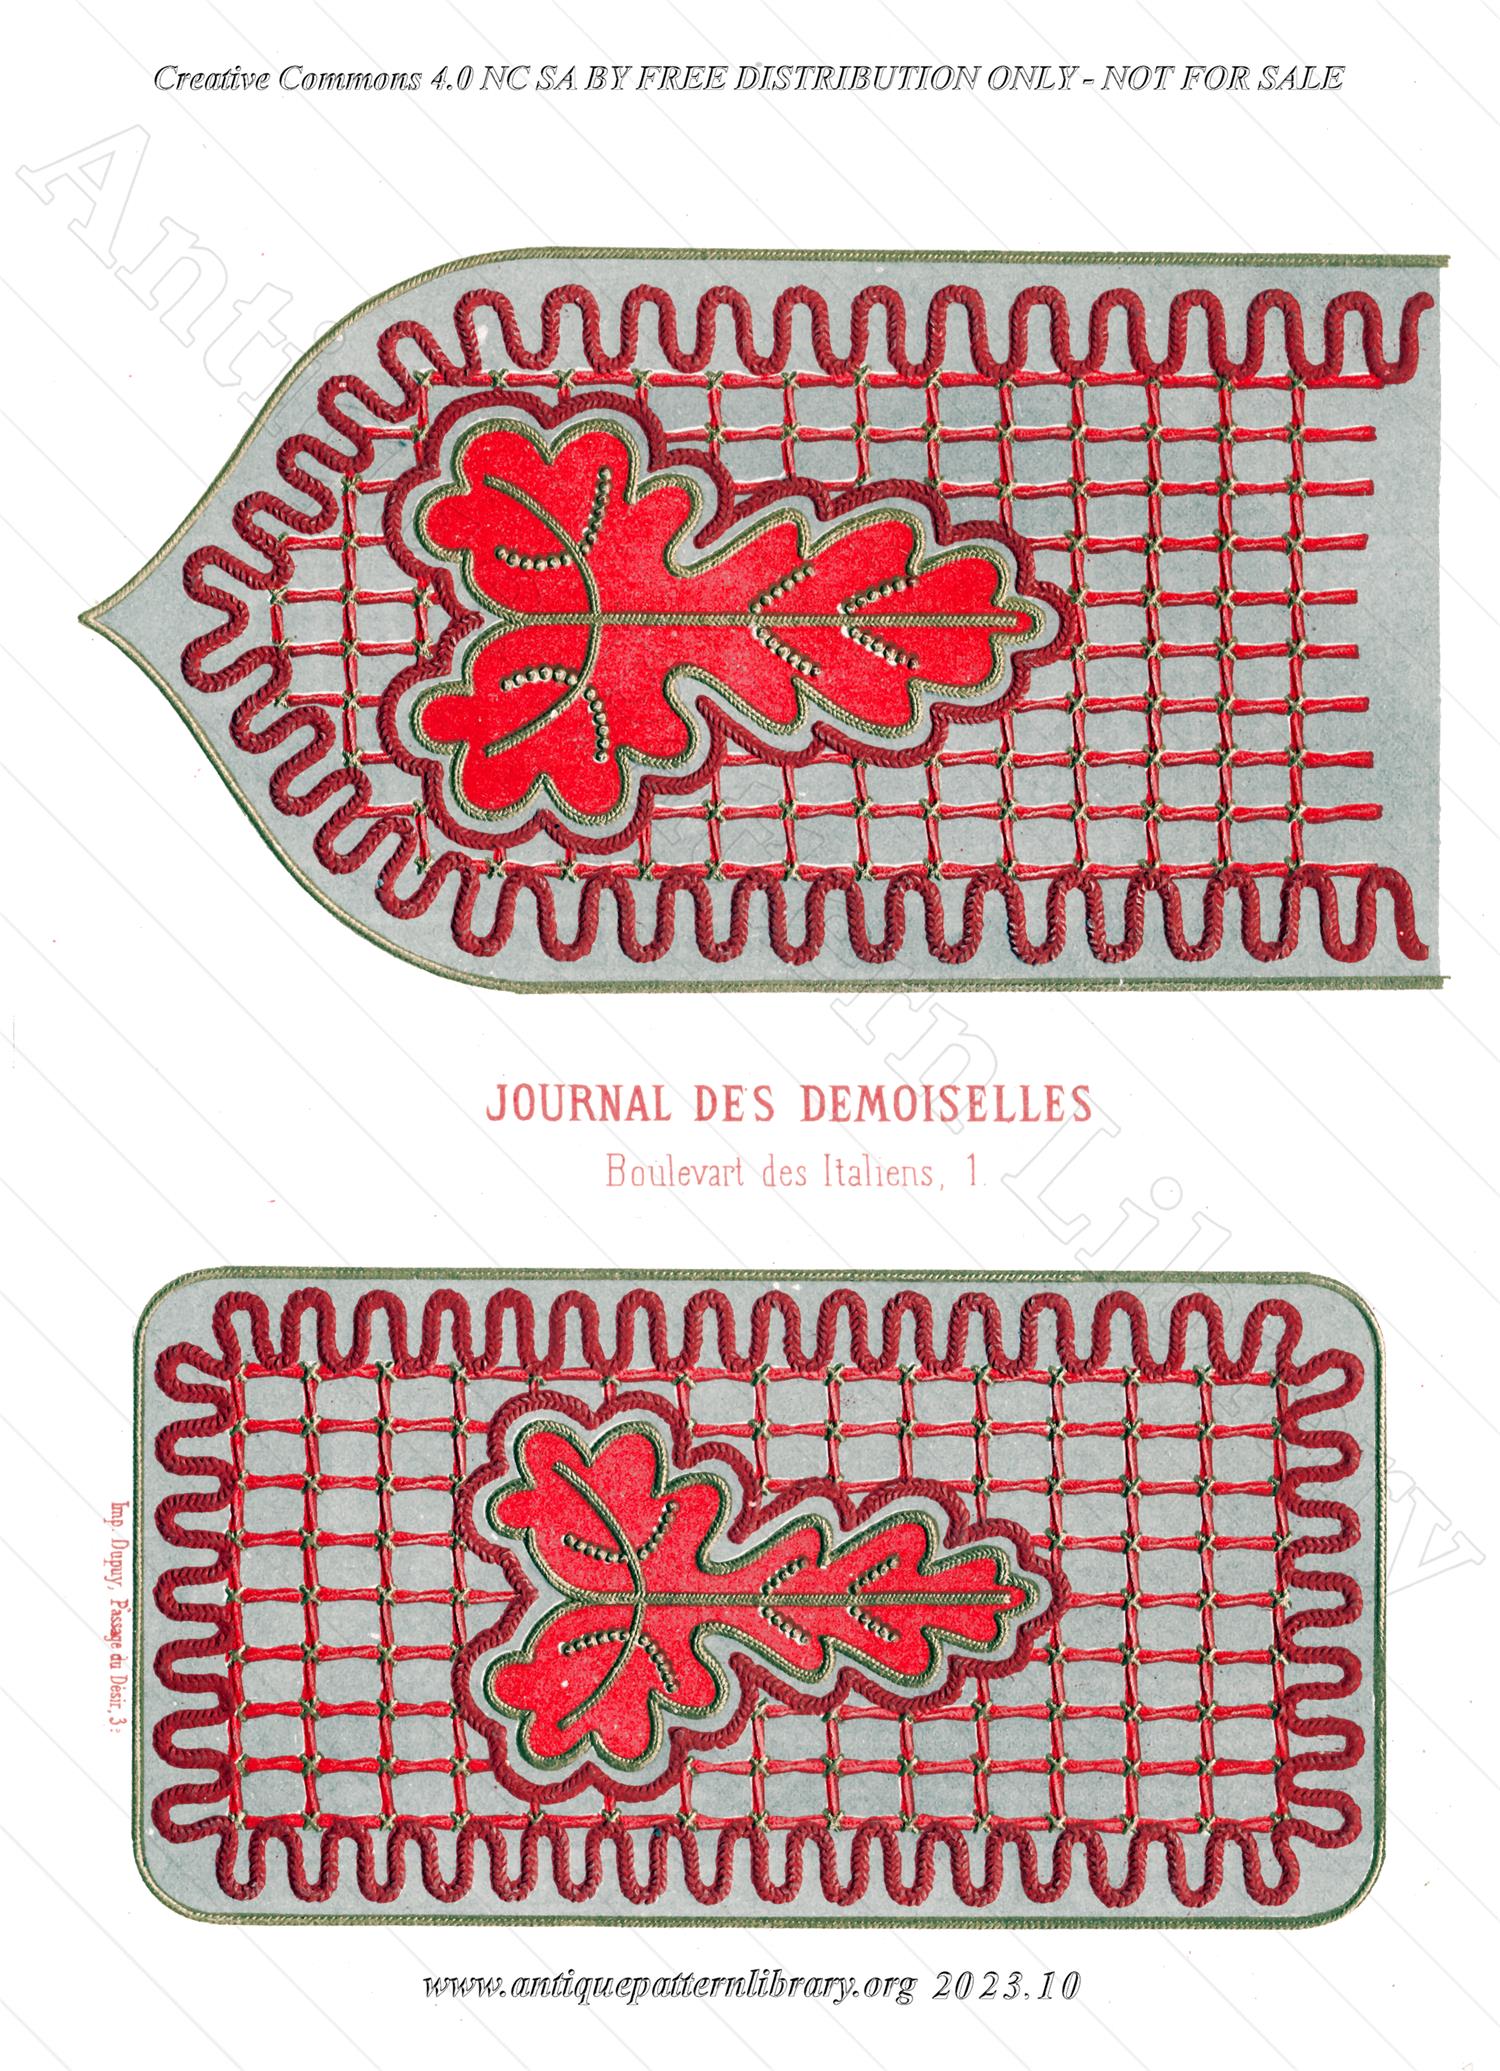 A-MH182 Table runner and place mat in red and grey